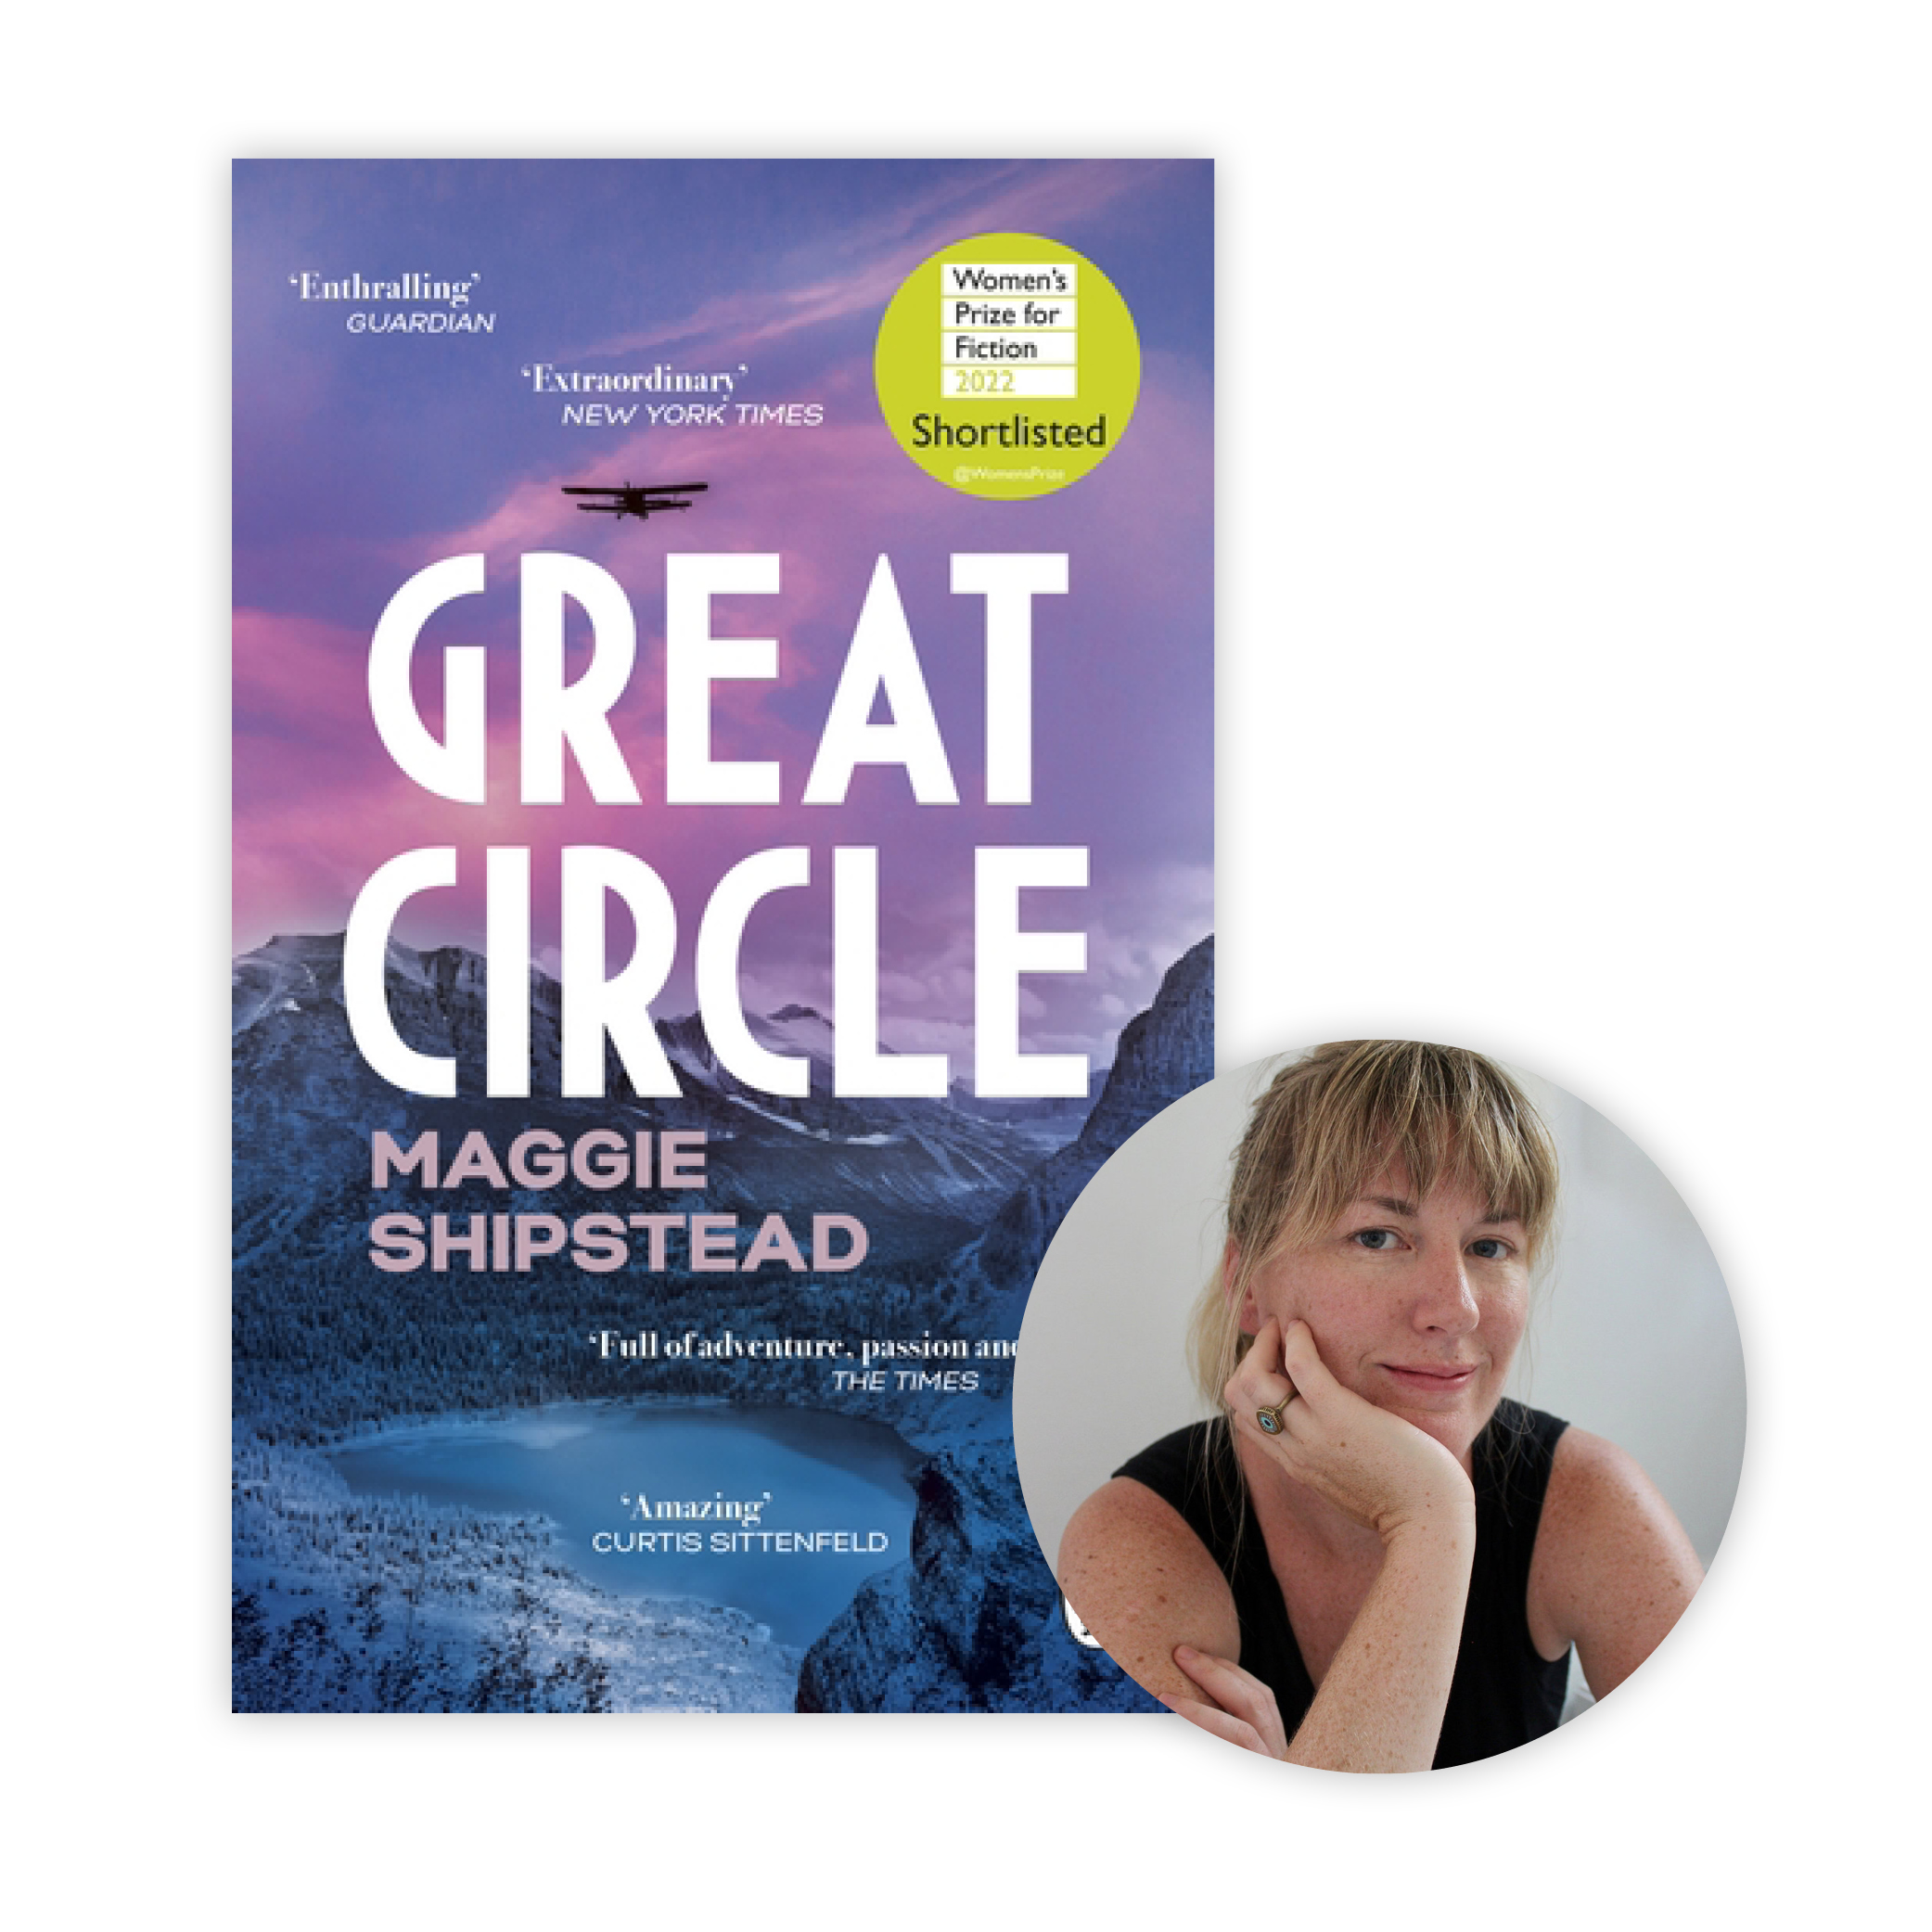 Great Circle and Maggie Shipstead